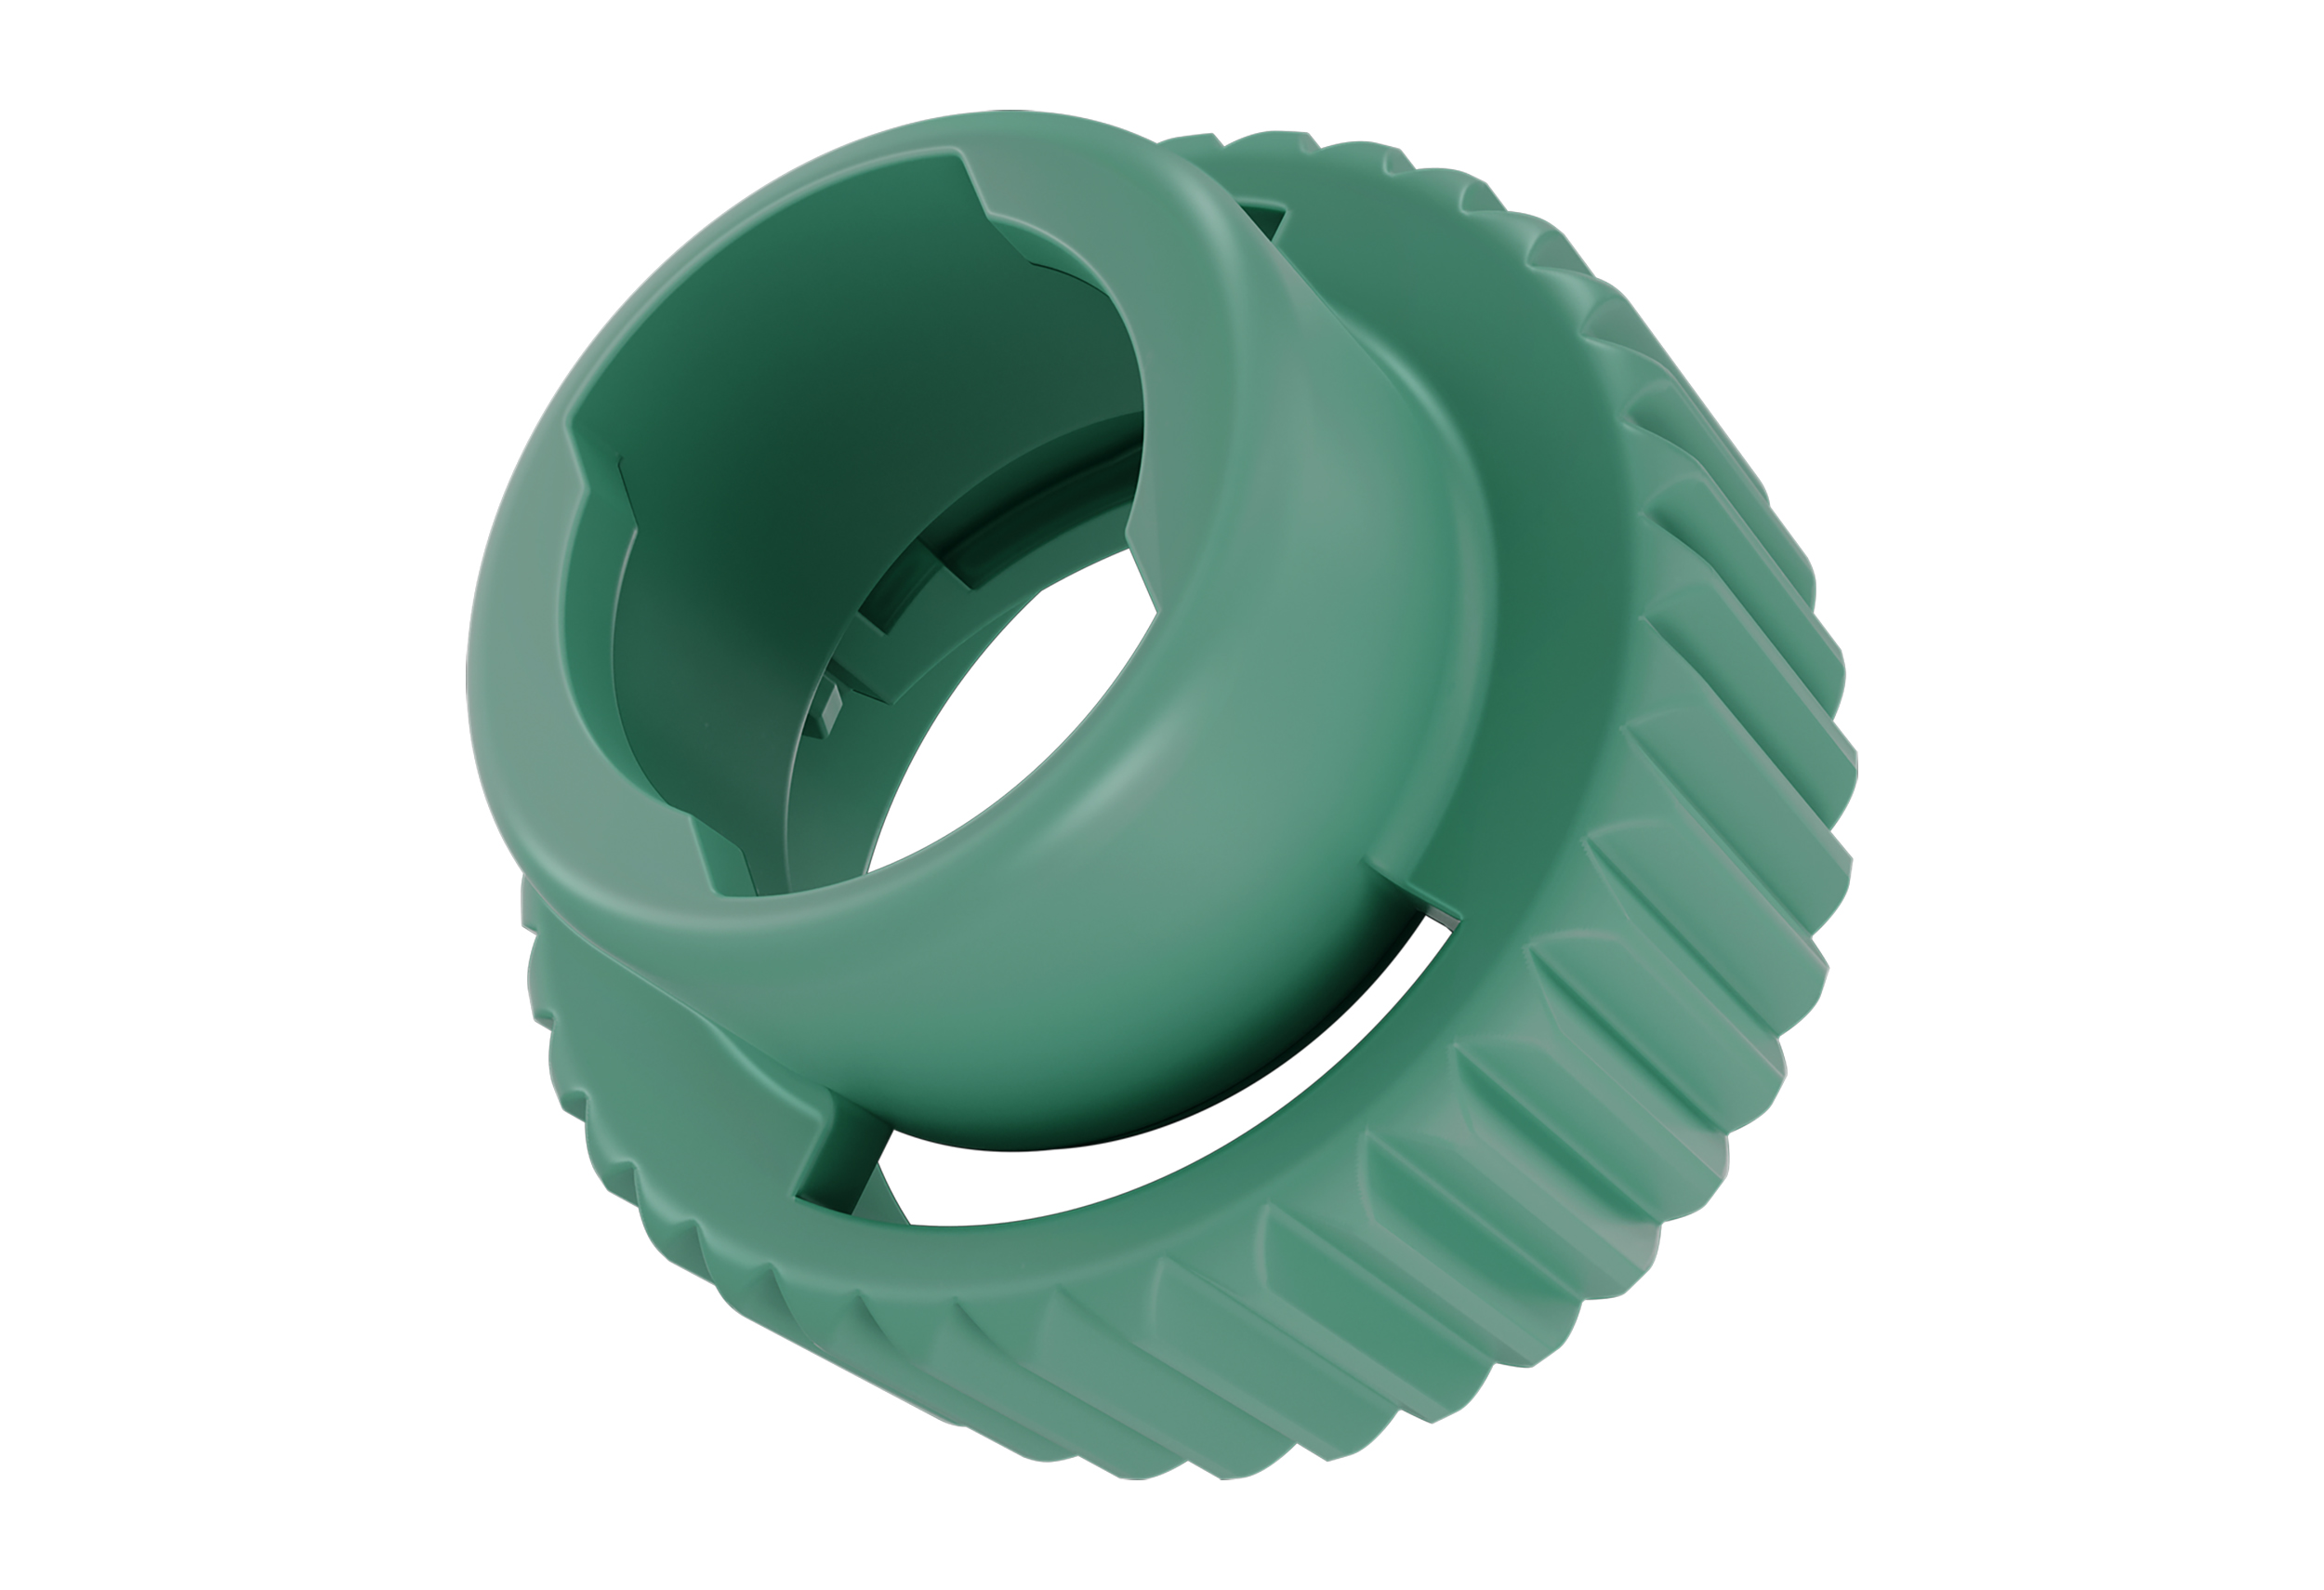 medmix upgrades its F-System with the 100% recycled greenLine™ bayonet ring